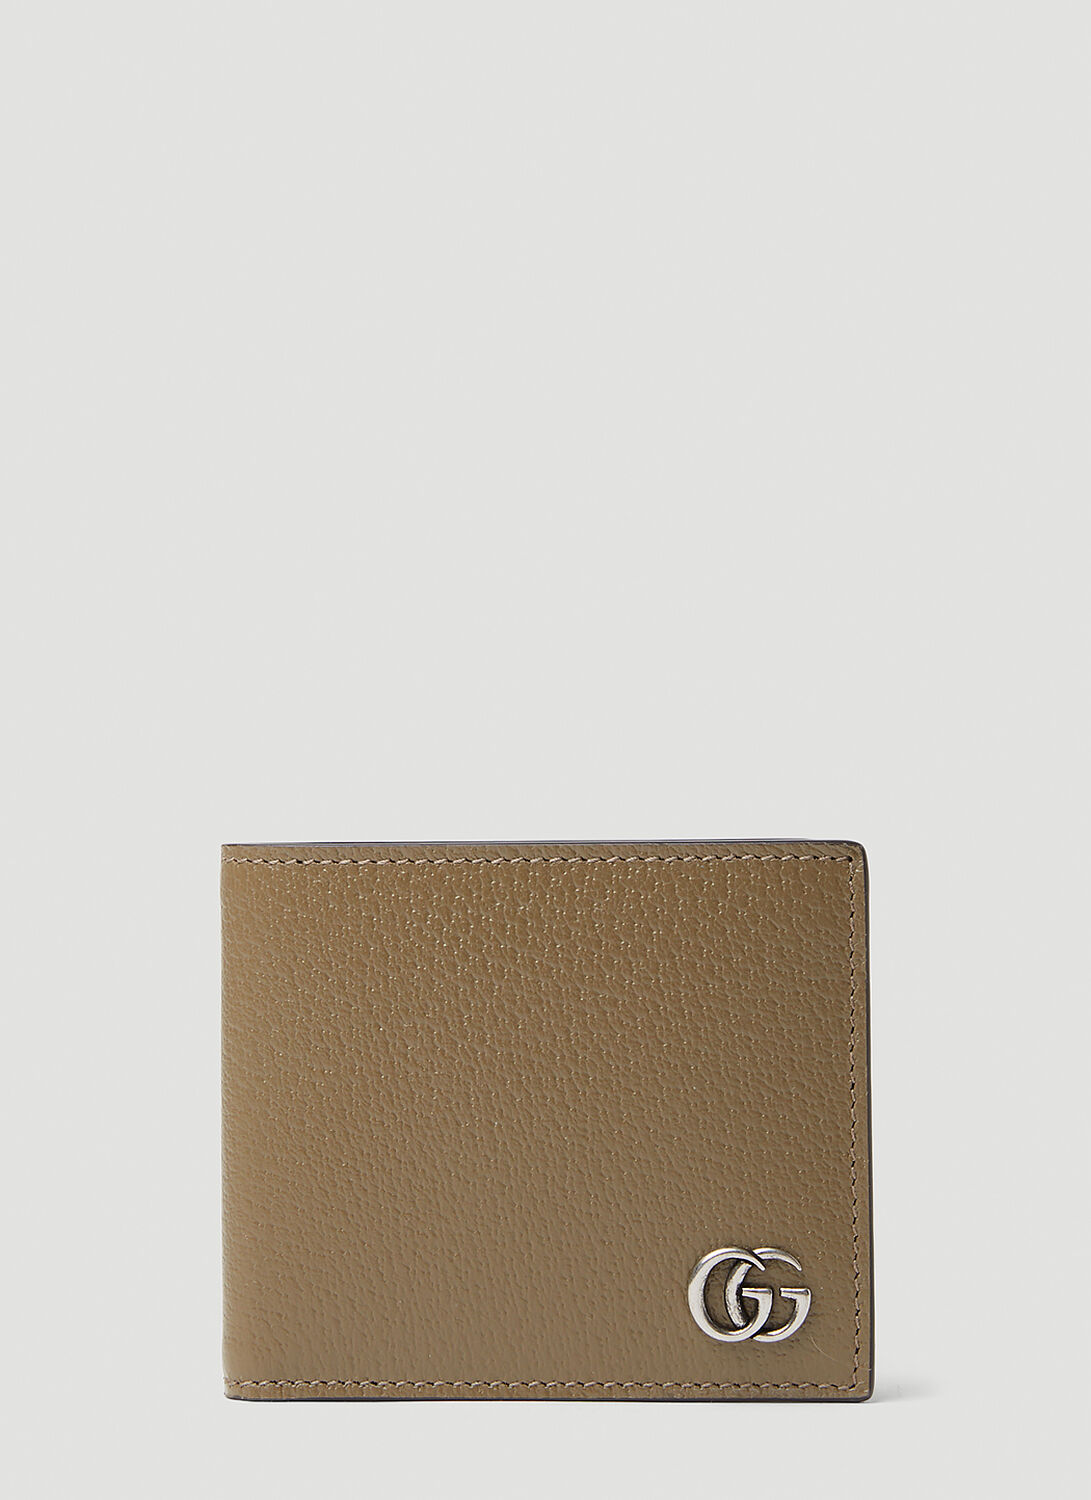 Gucci Men Wallet At Huge Discounted Price - Offer By Dilli Bazar